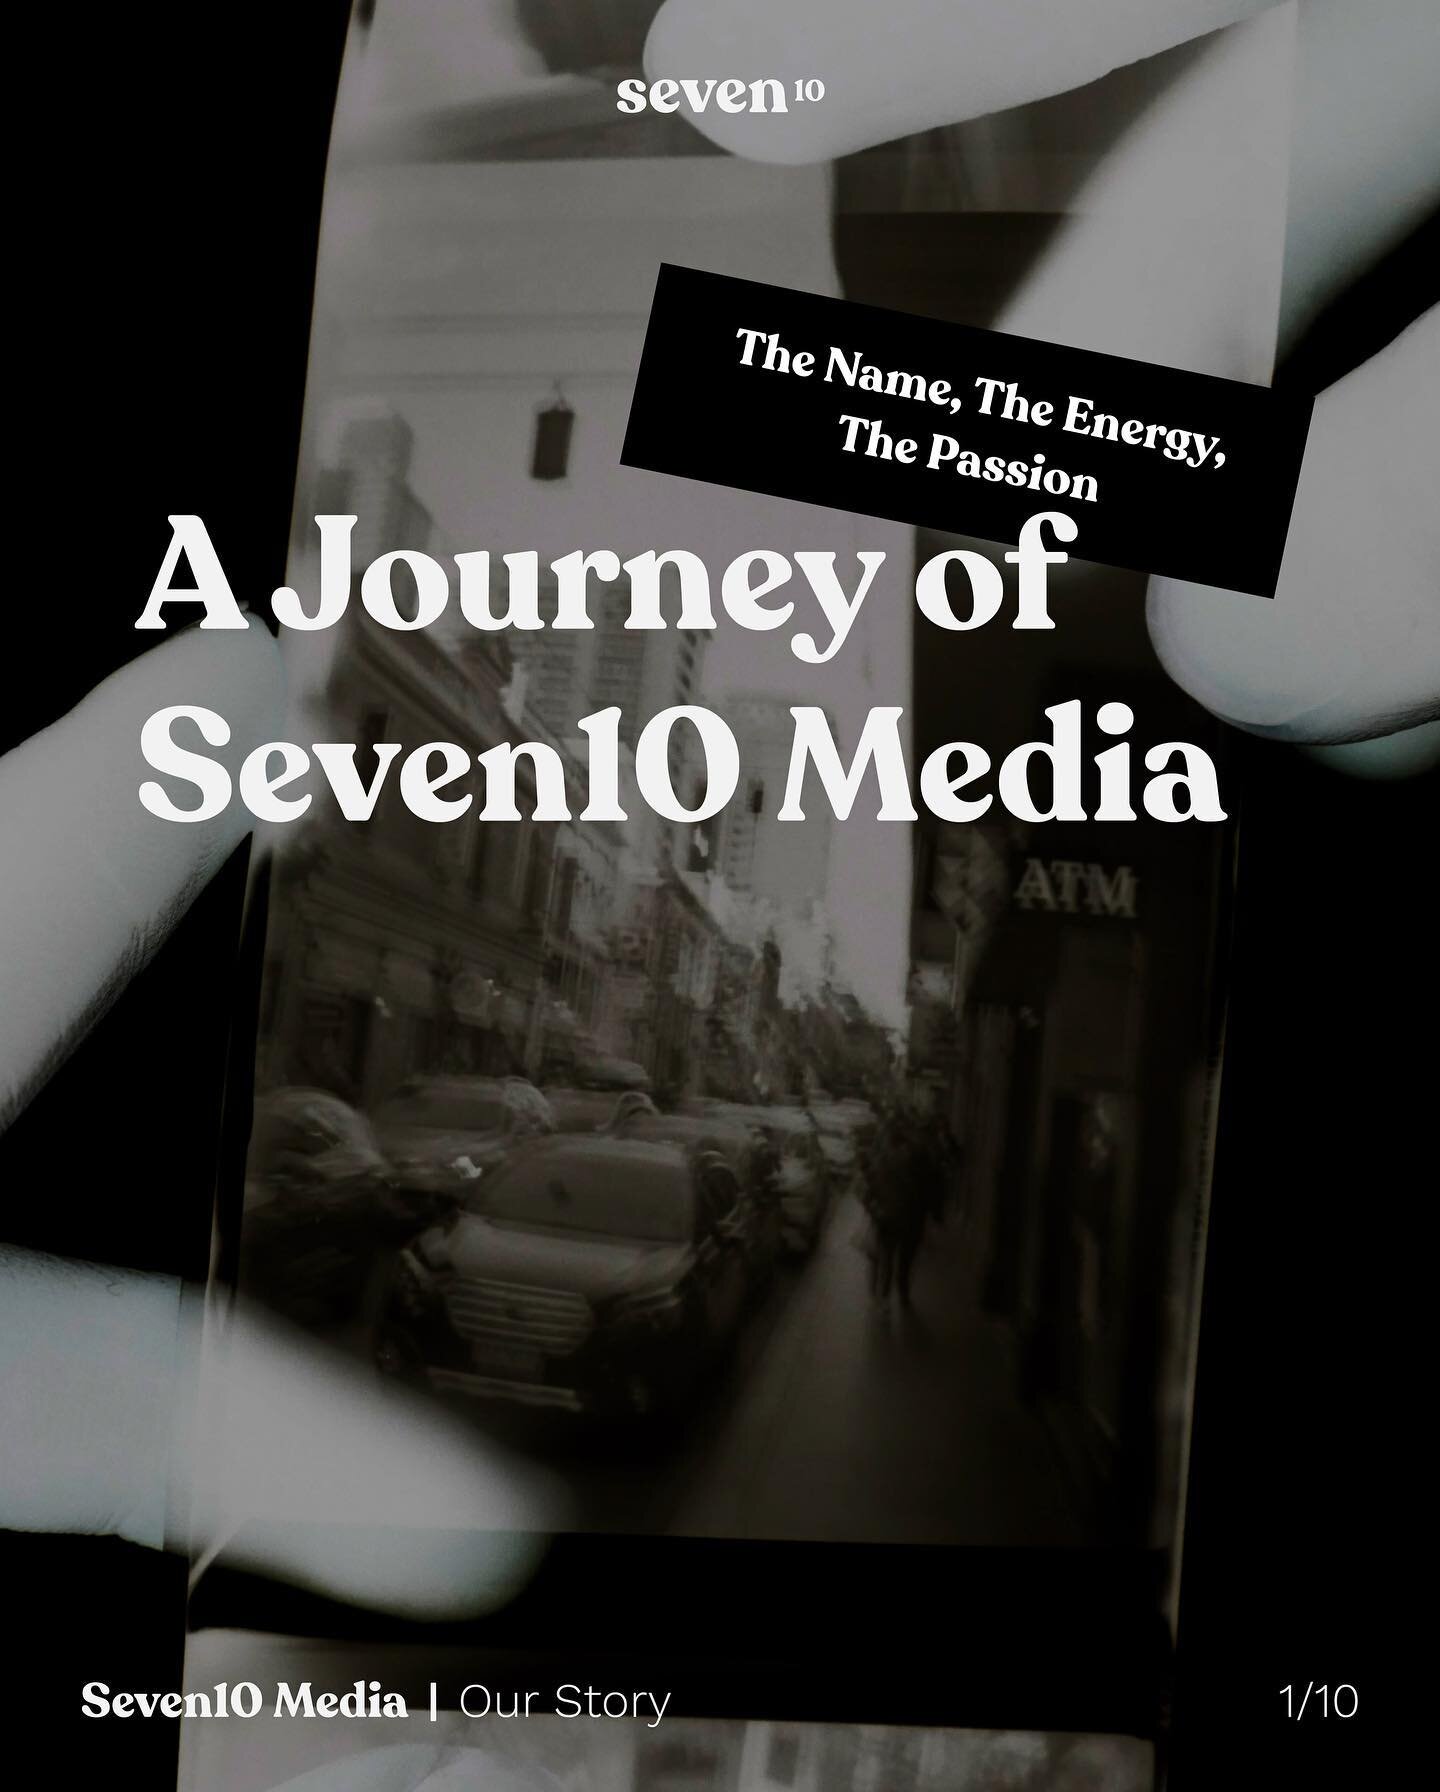 At Seven10 Media, our name is more than just a brand label. Today, we continue to grow and evolve, driven by our commitment to storytelling and creating a safe platform for filmmakers and individuals to share their stories.

Follow us for the latest 